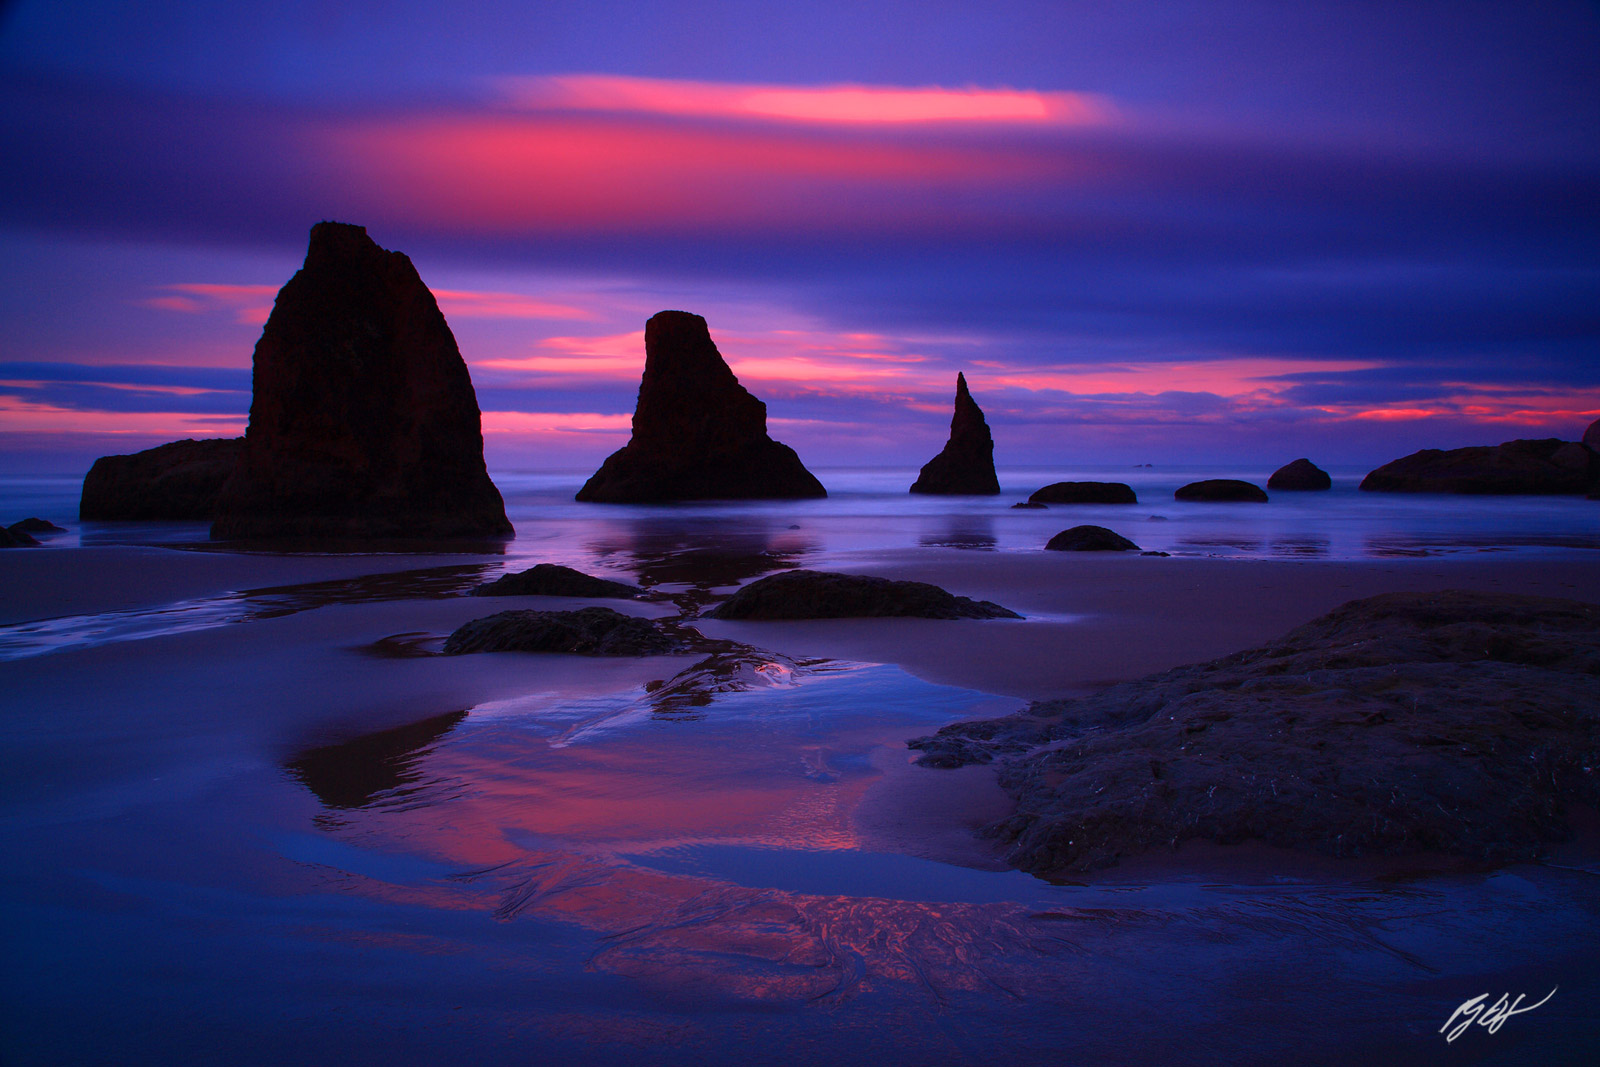 Sunset and Sea Stacks from Face Rock Beach in Bandon on the Southern Oregon Coast